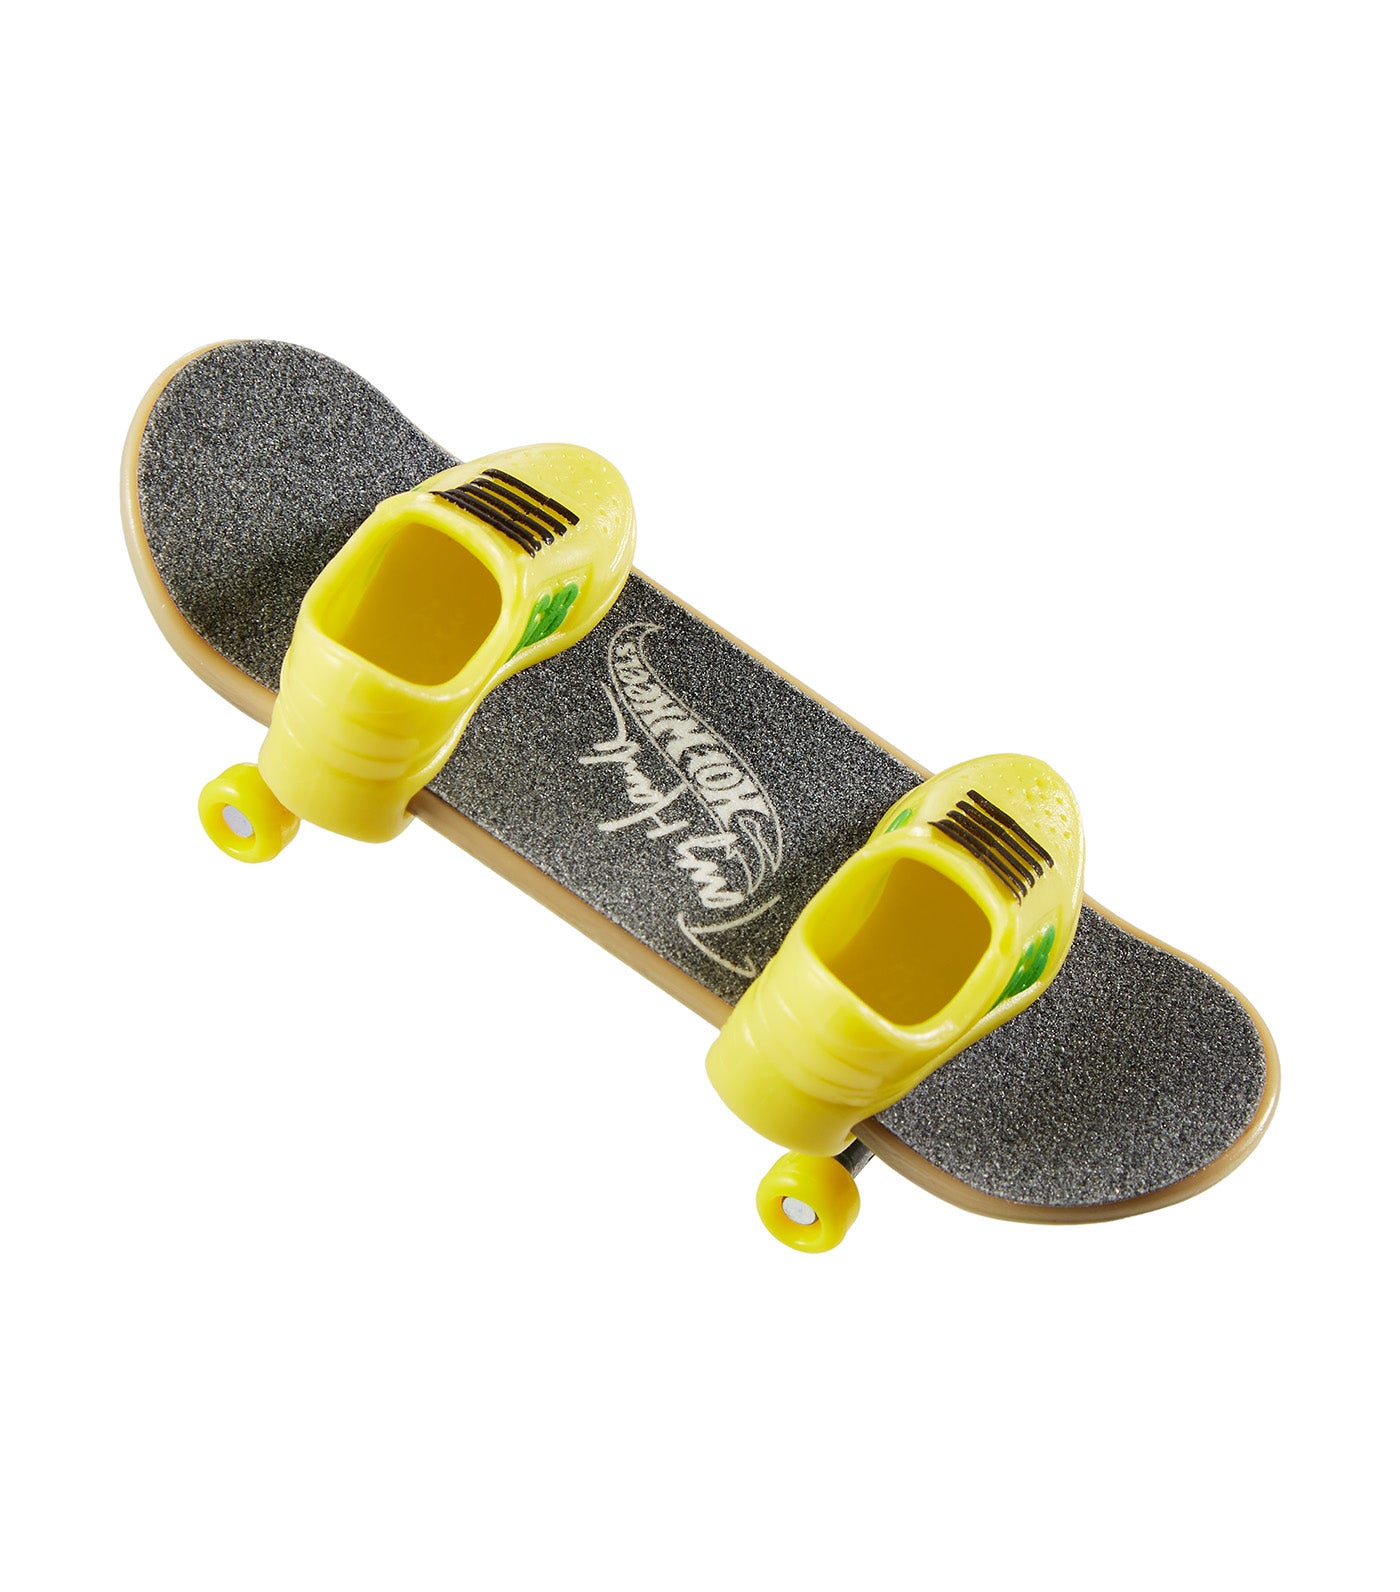 Skate - Project Venice Fingerboard and Shoe 8